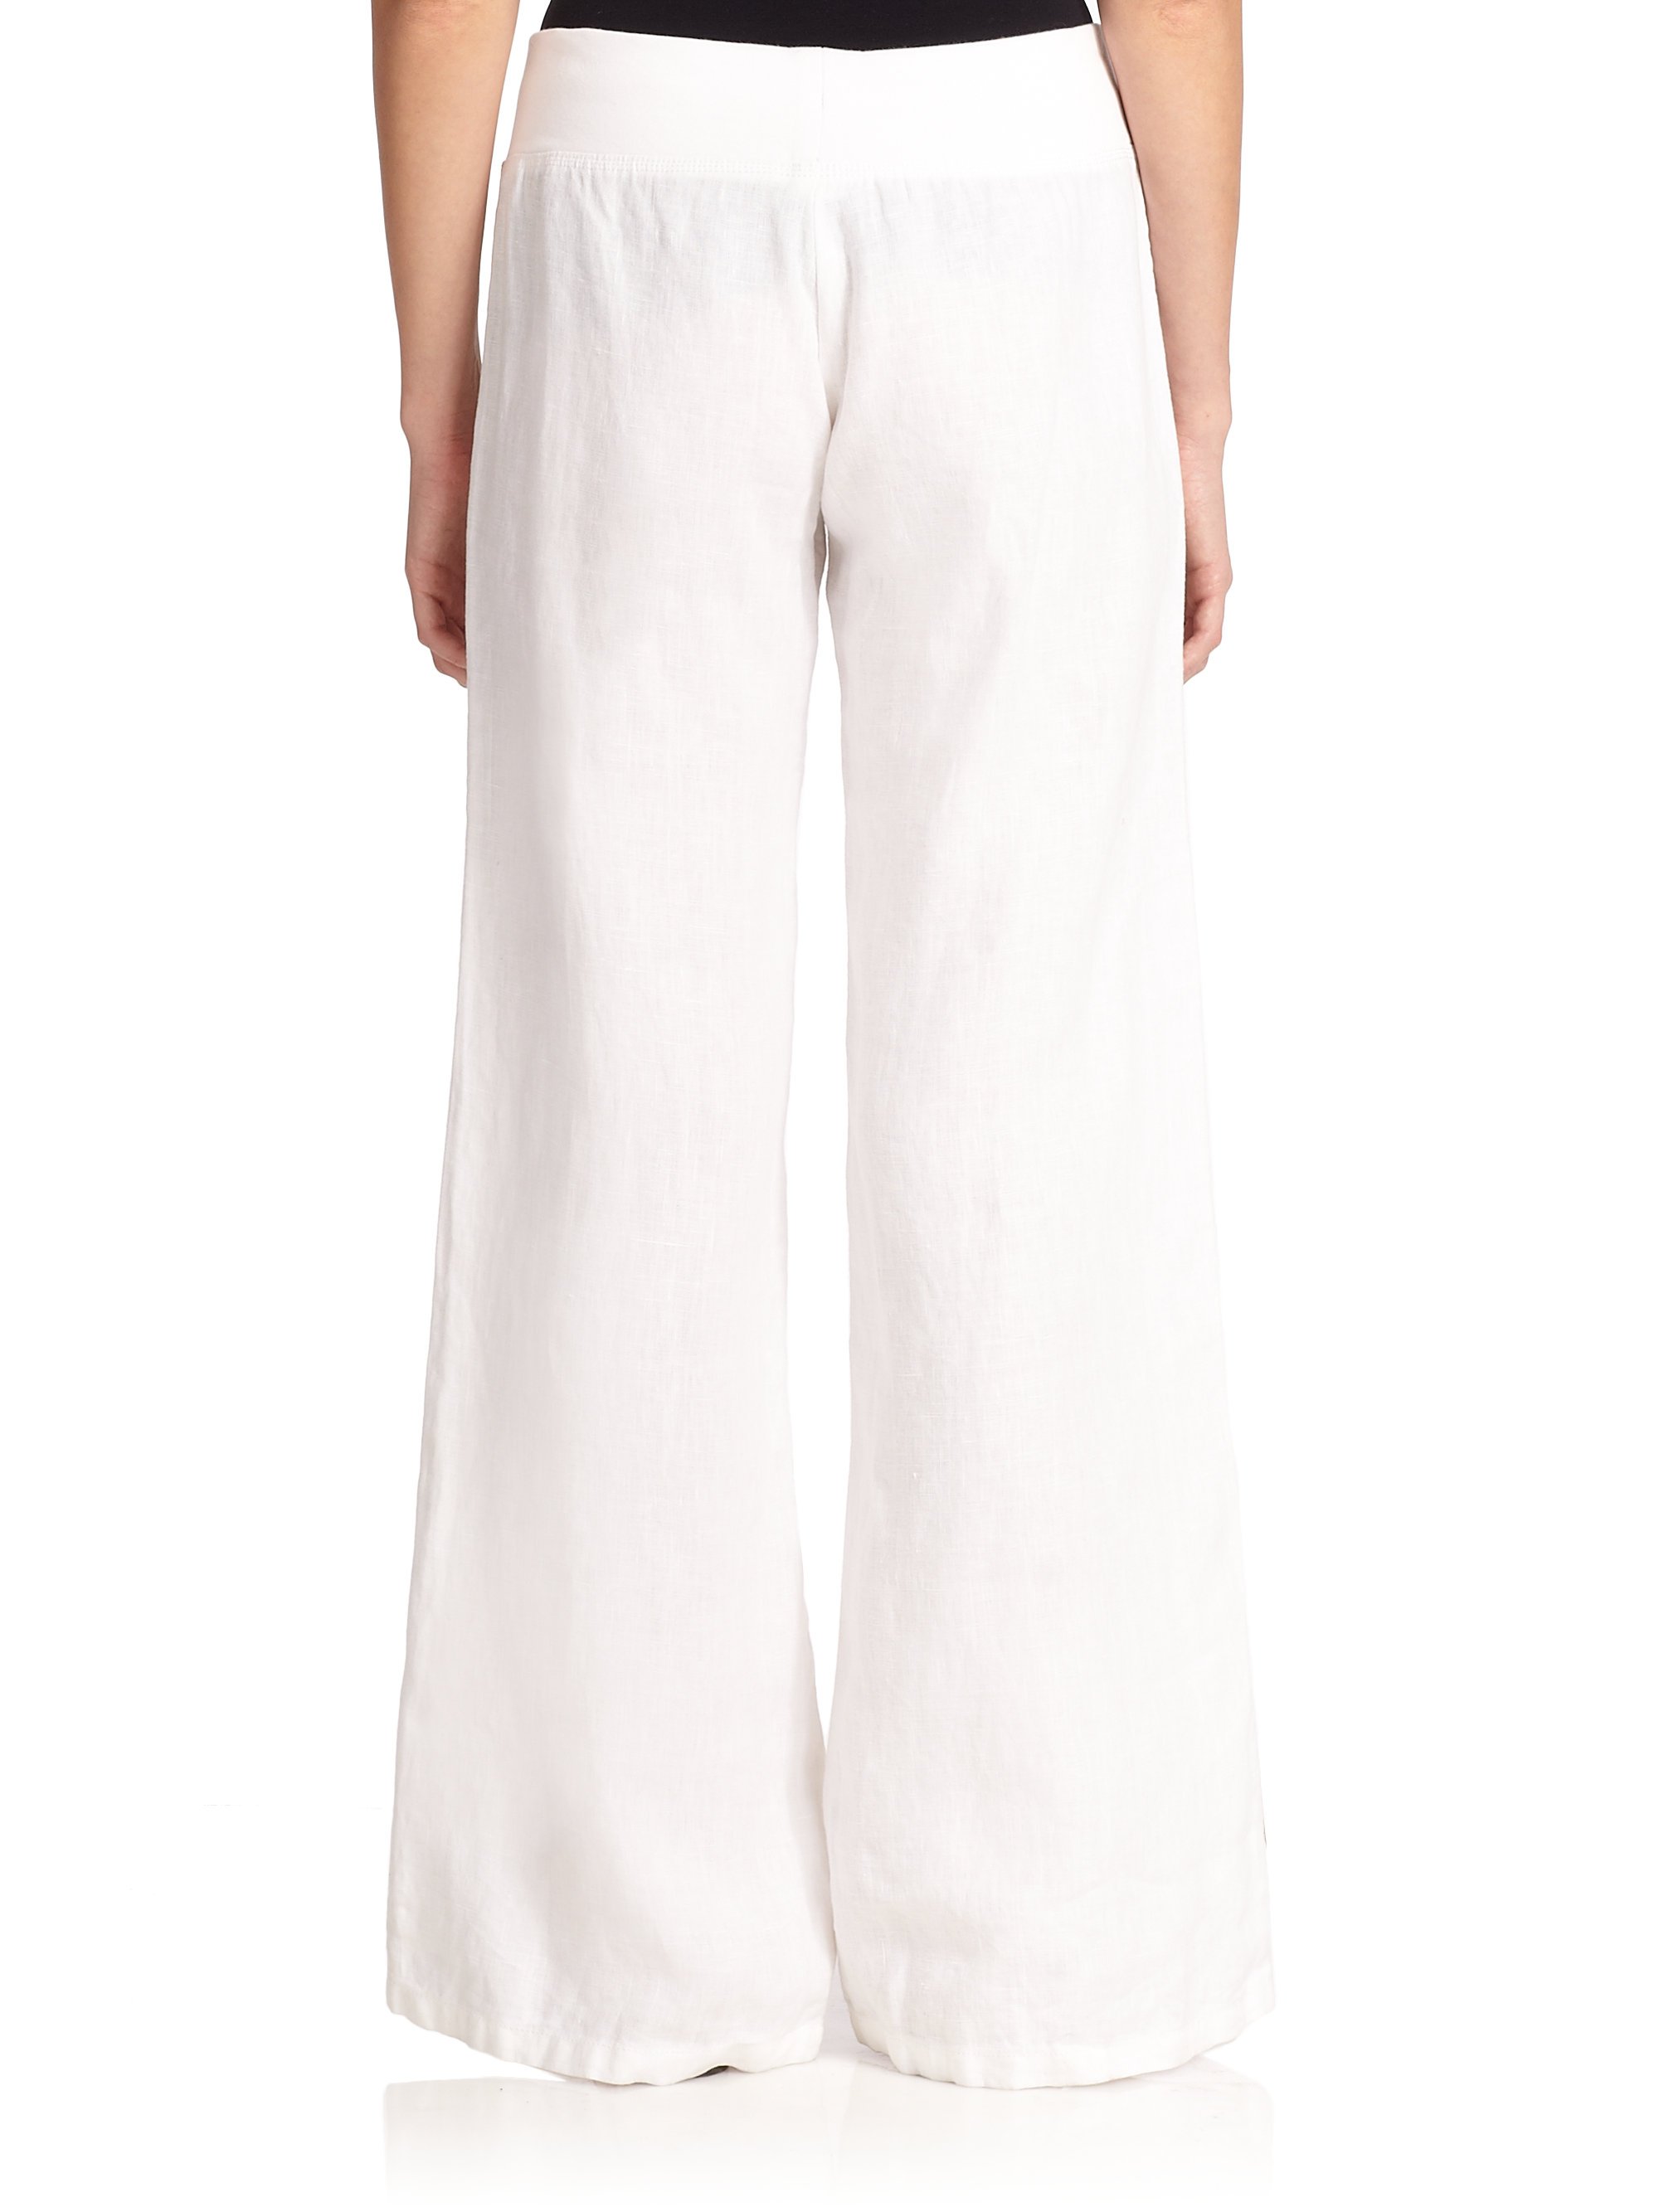 Lilly pulitzer Linen Beach Pants in White | Lyst